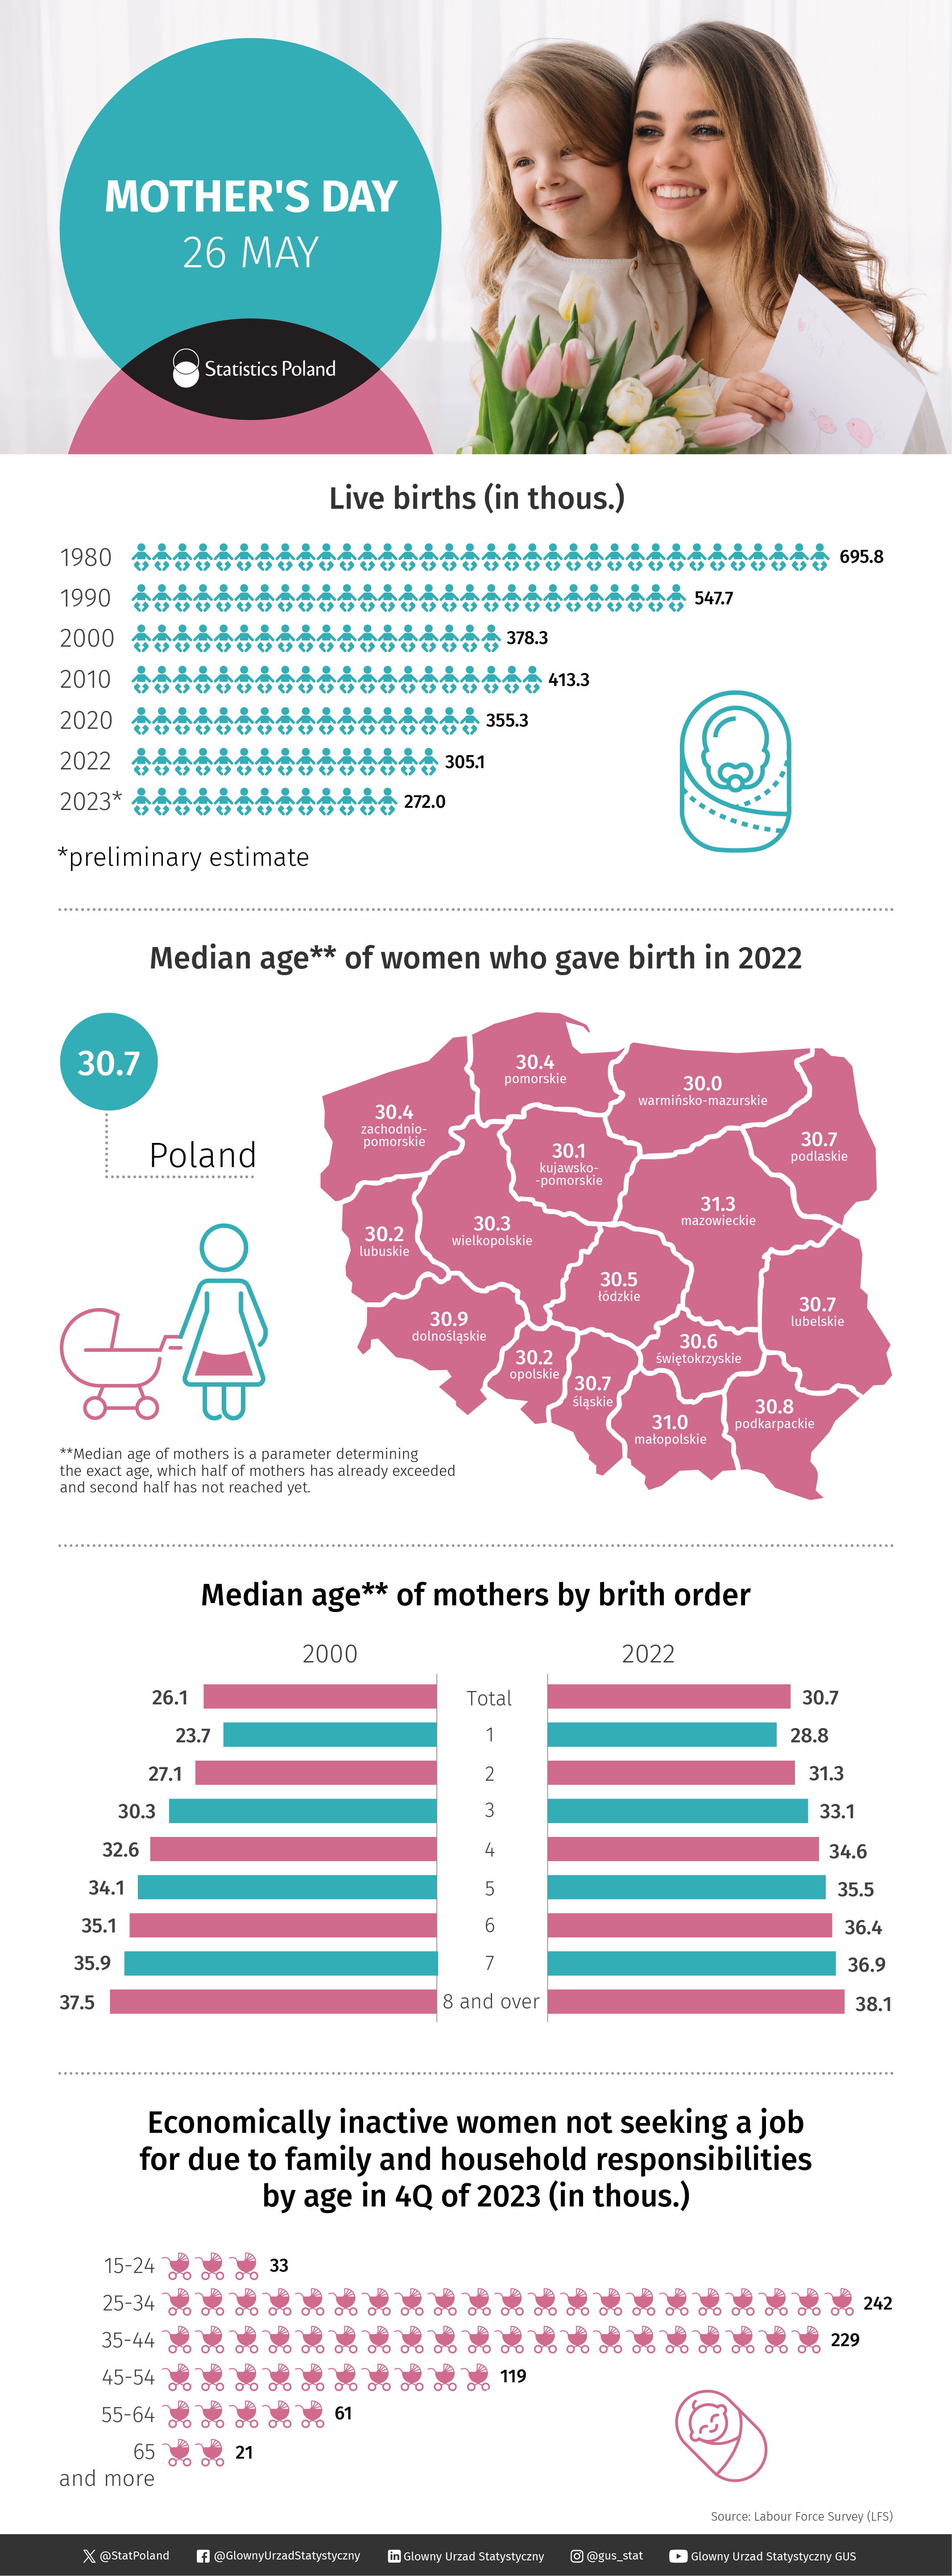 Infographic about Mother's Day. Downloadable data in XLSX file above